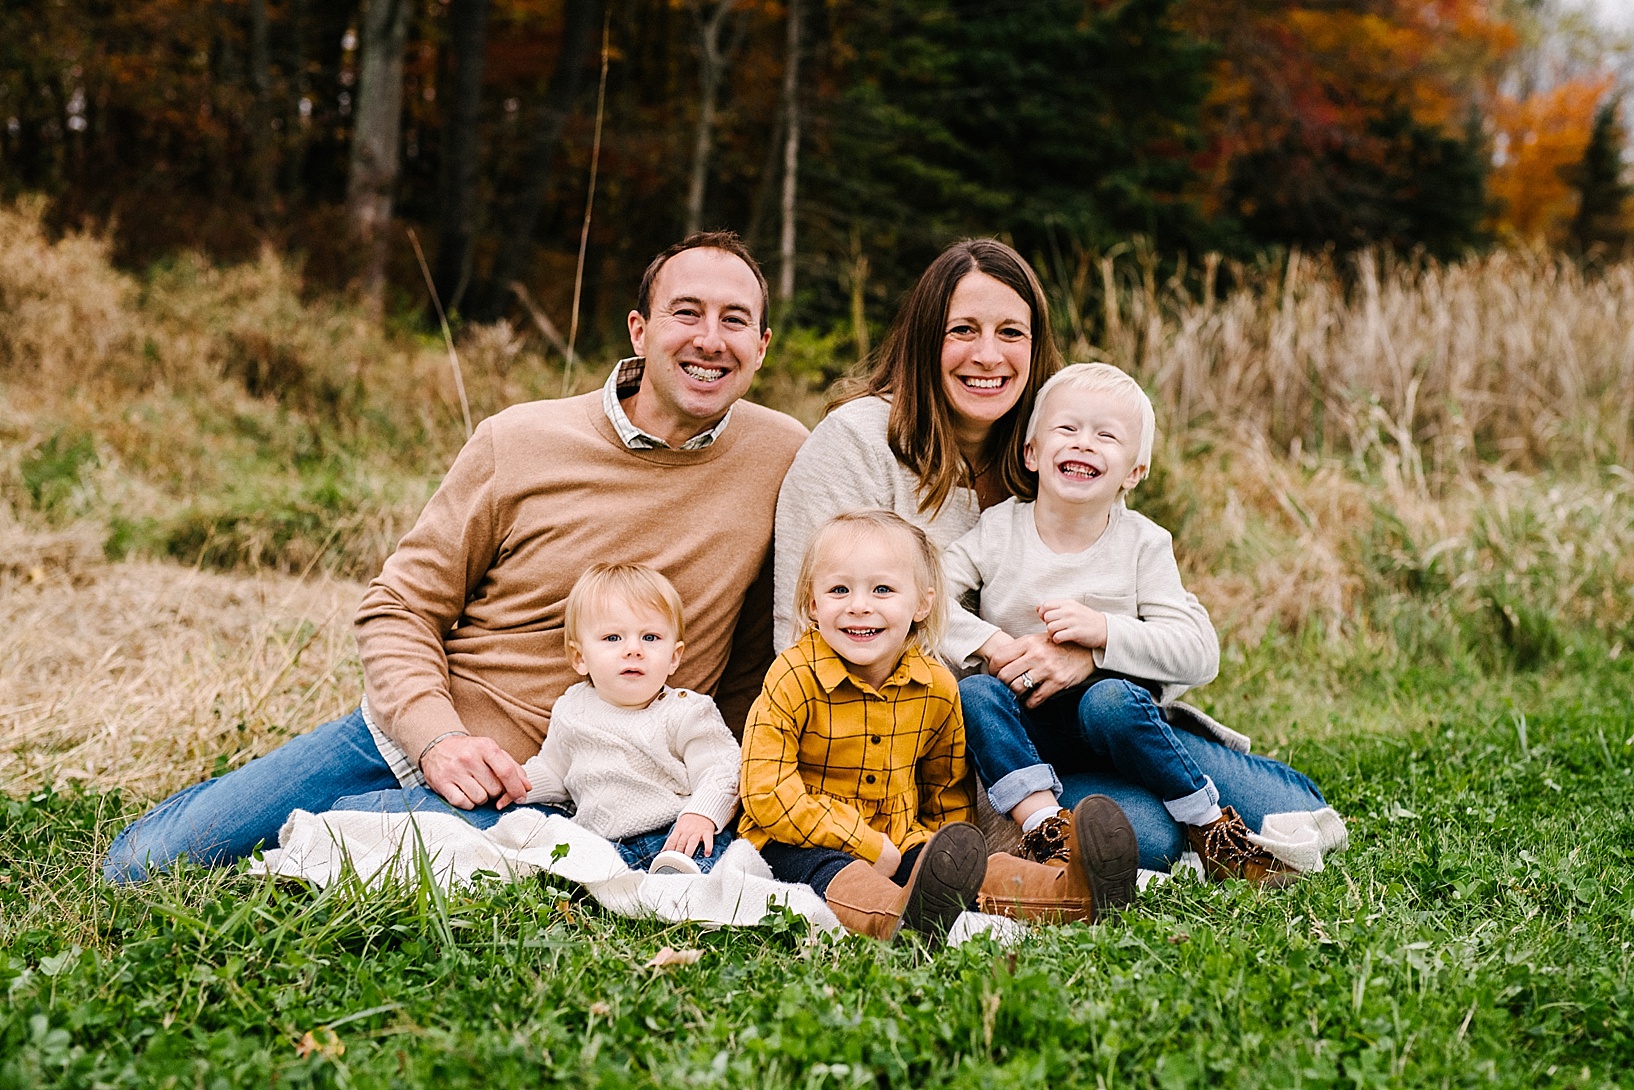 Poland OH fall family session Carlyn K Photography